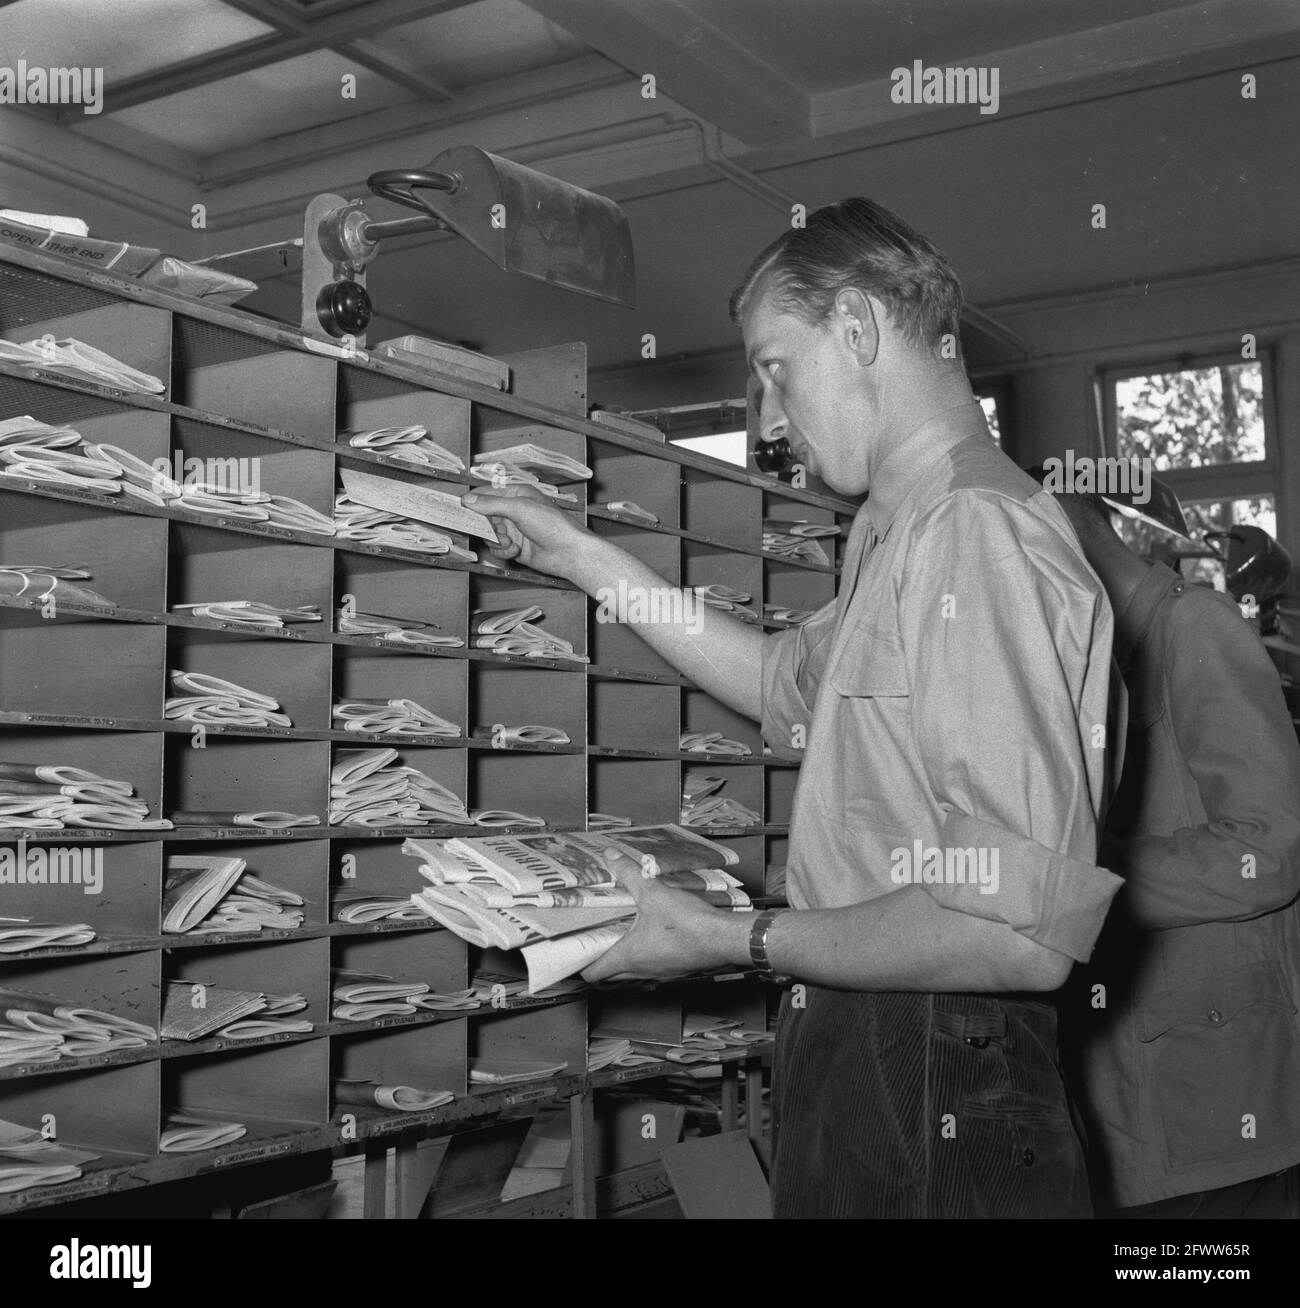 Assignment CNV. Letter carrier sorting, September 20, 1956, letter carriers, post offices, The Netherlands, 20th century press agency photo, news to remember, documentary, historic photography 1945-1990, visual stories, human history of the Twentieth Century, capturing moments in time Stock Photo